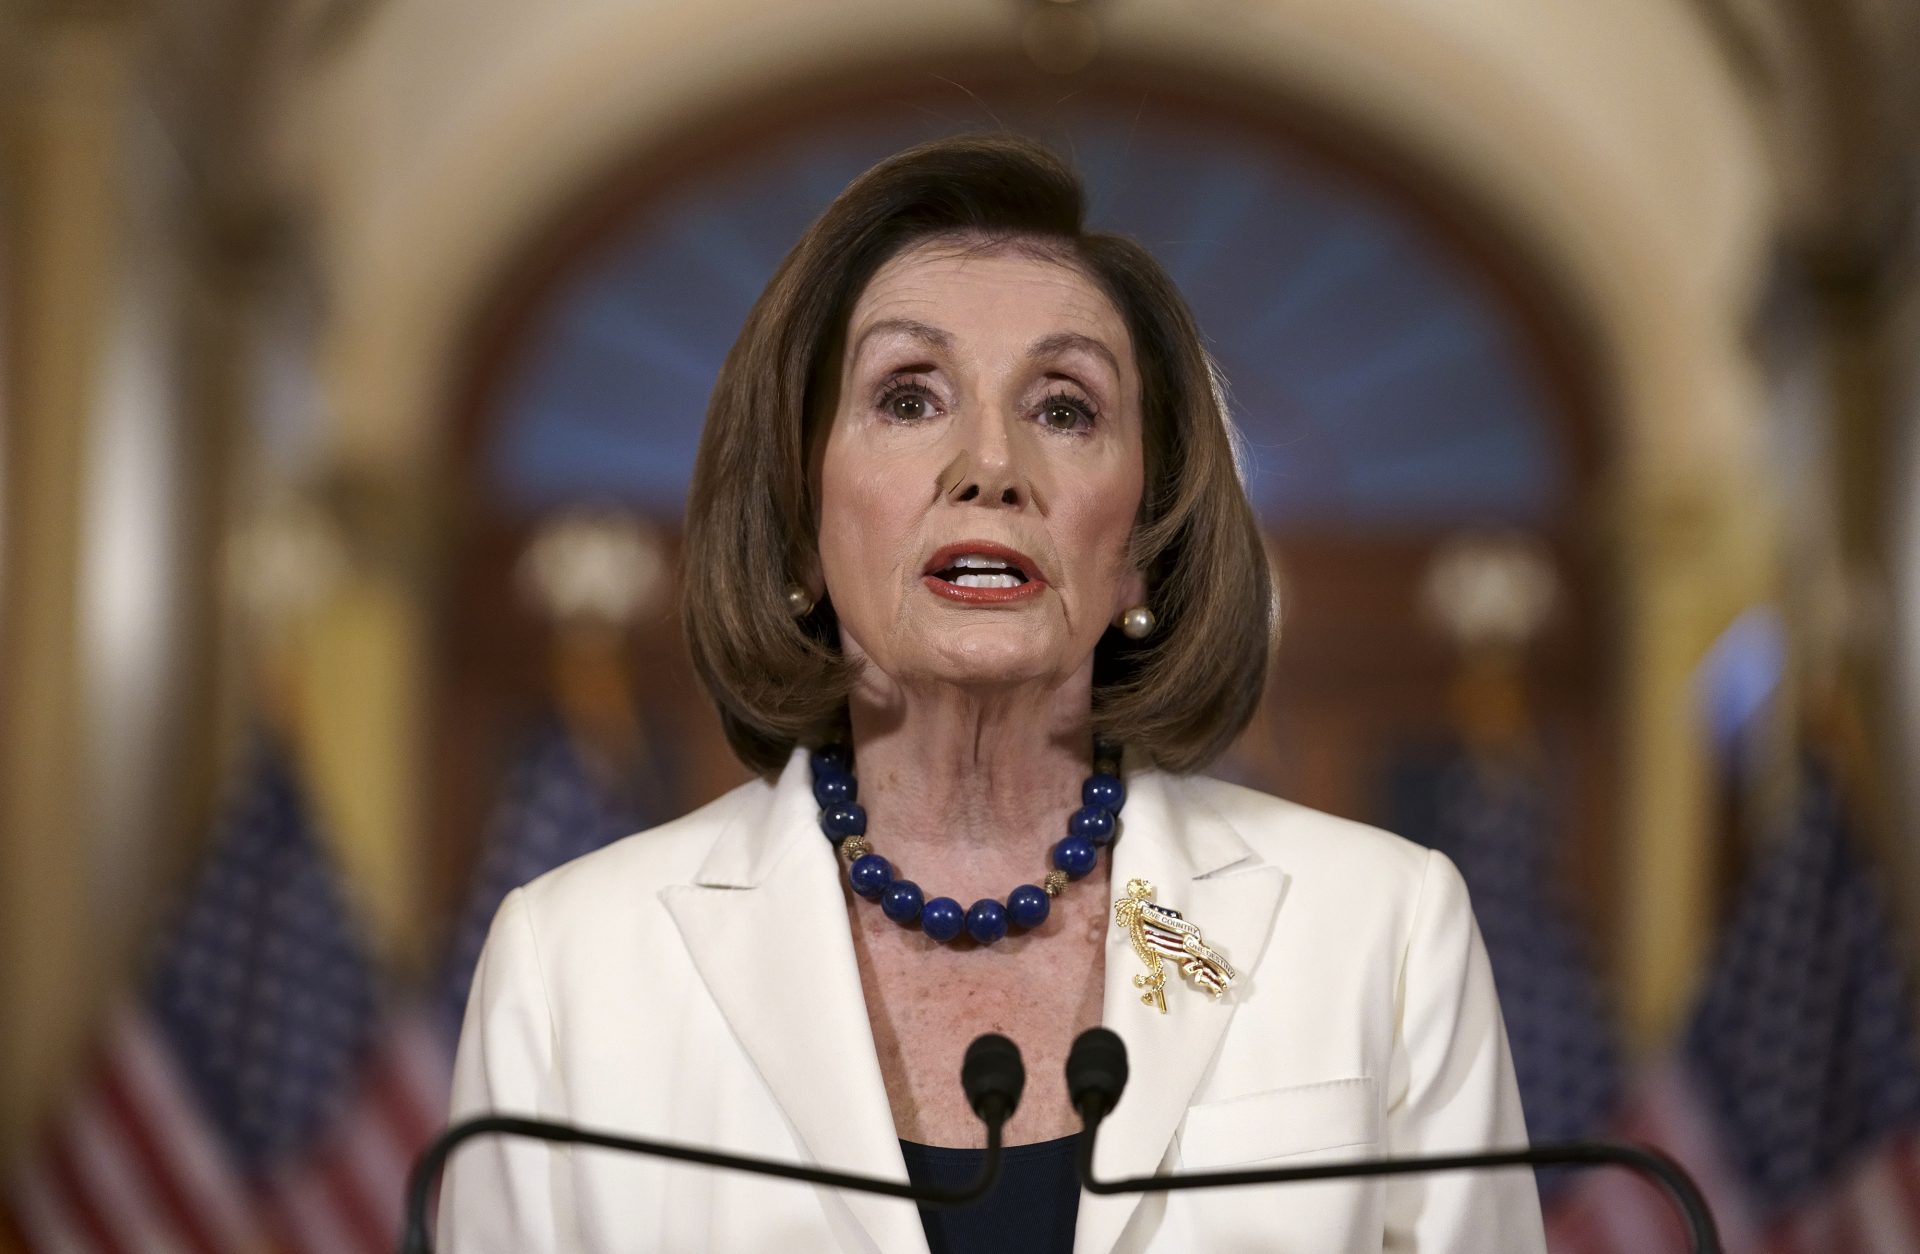 Speaker of the House Nancy Pelosi, D-Calif., makes a statement at the Capitol in Washington, Thursday, Dec. 5, 2019. Pelosi says the House is drafting articles of impeachment against President Donald Trump.